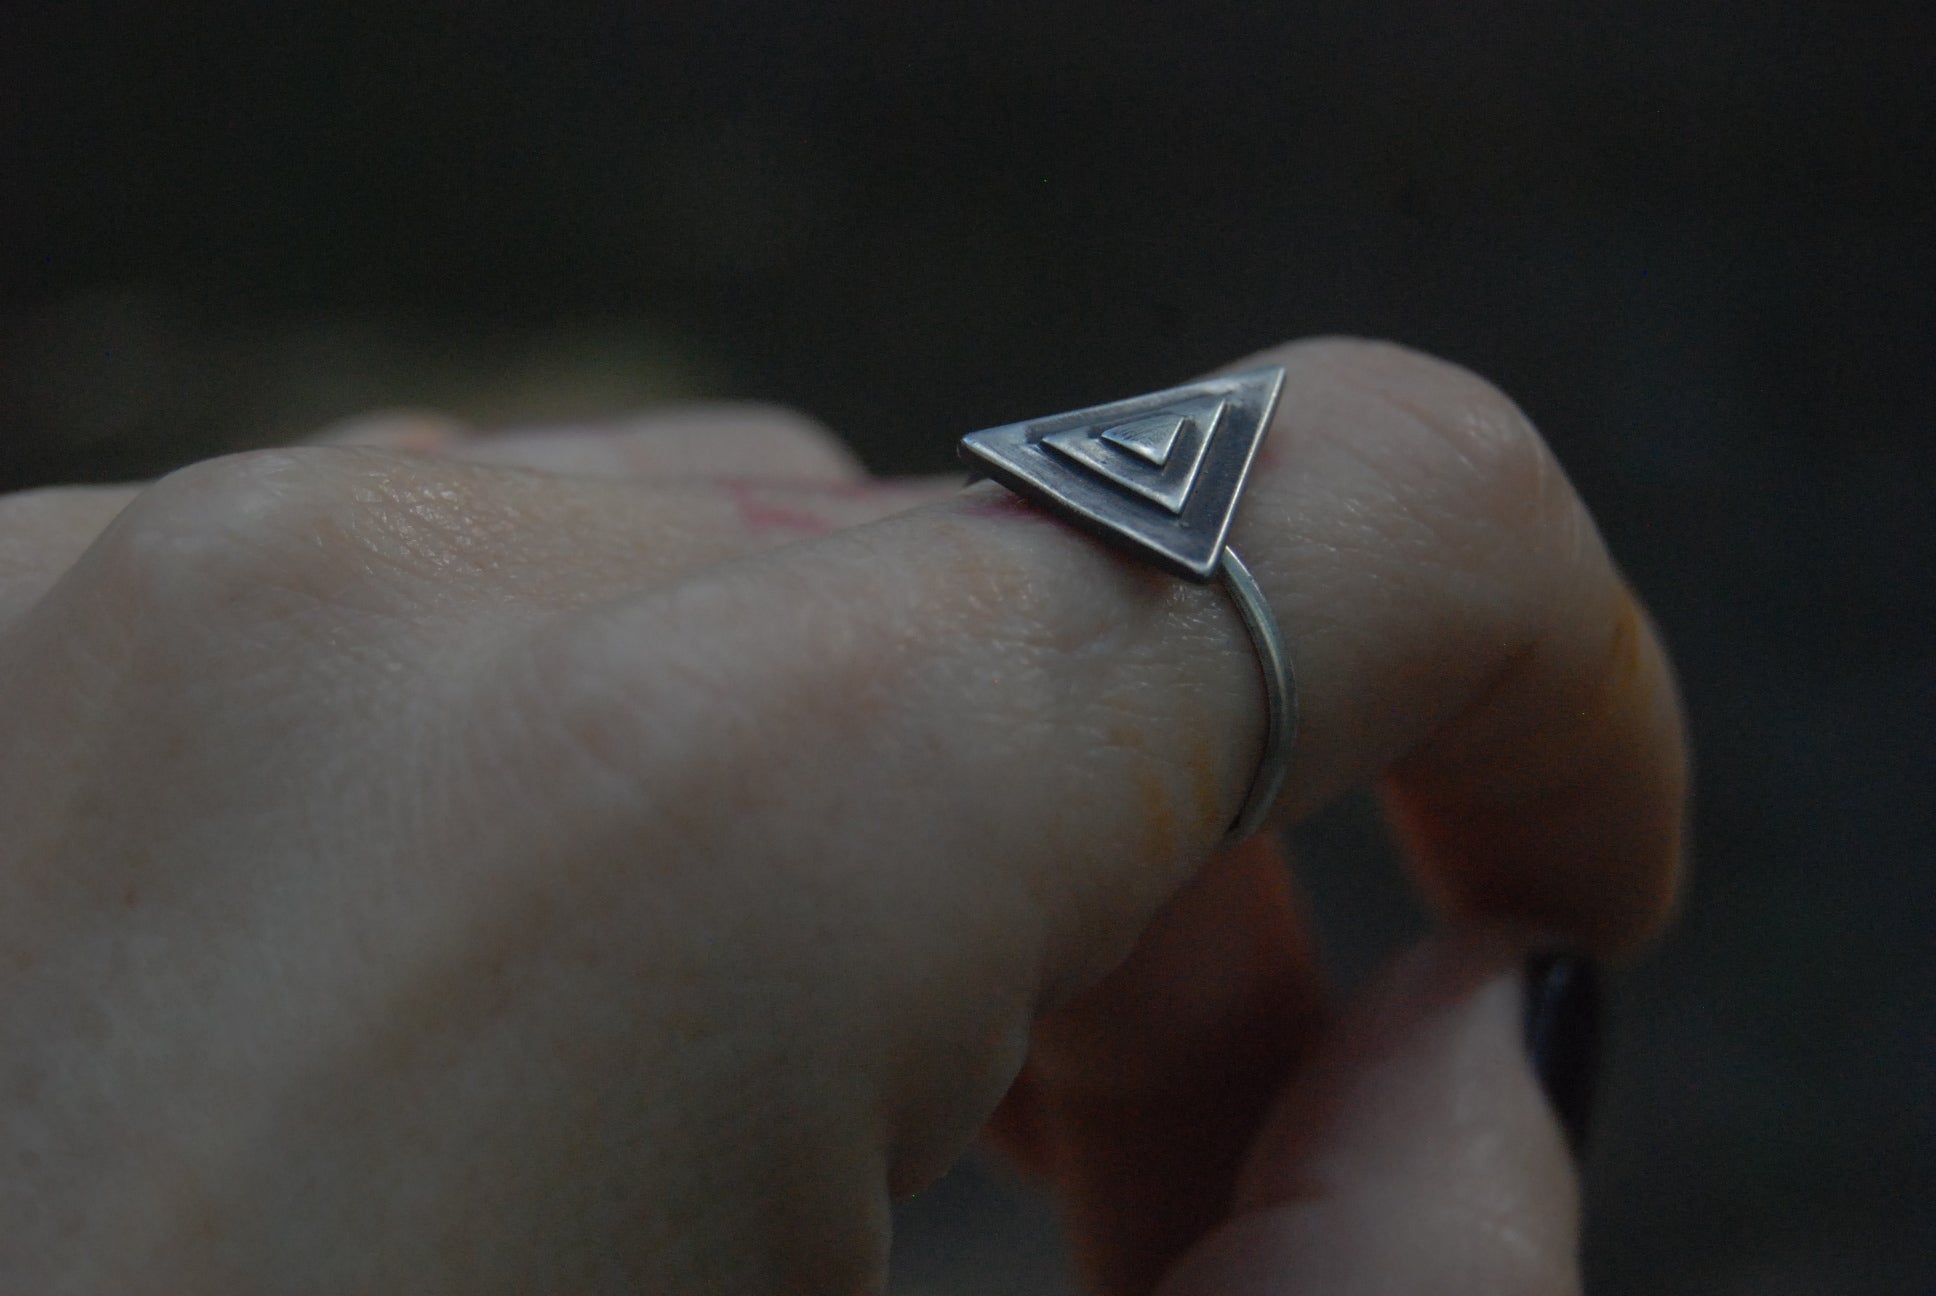 Triangle stack ring